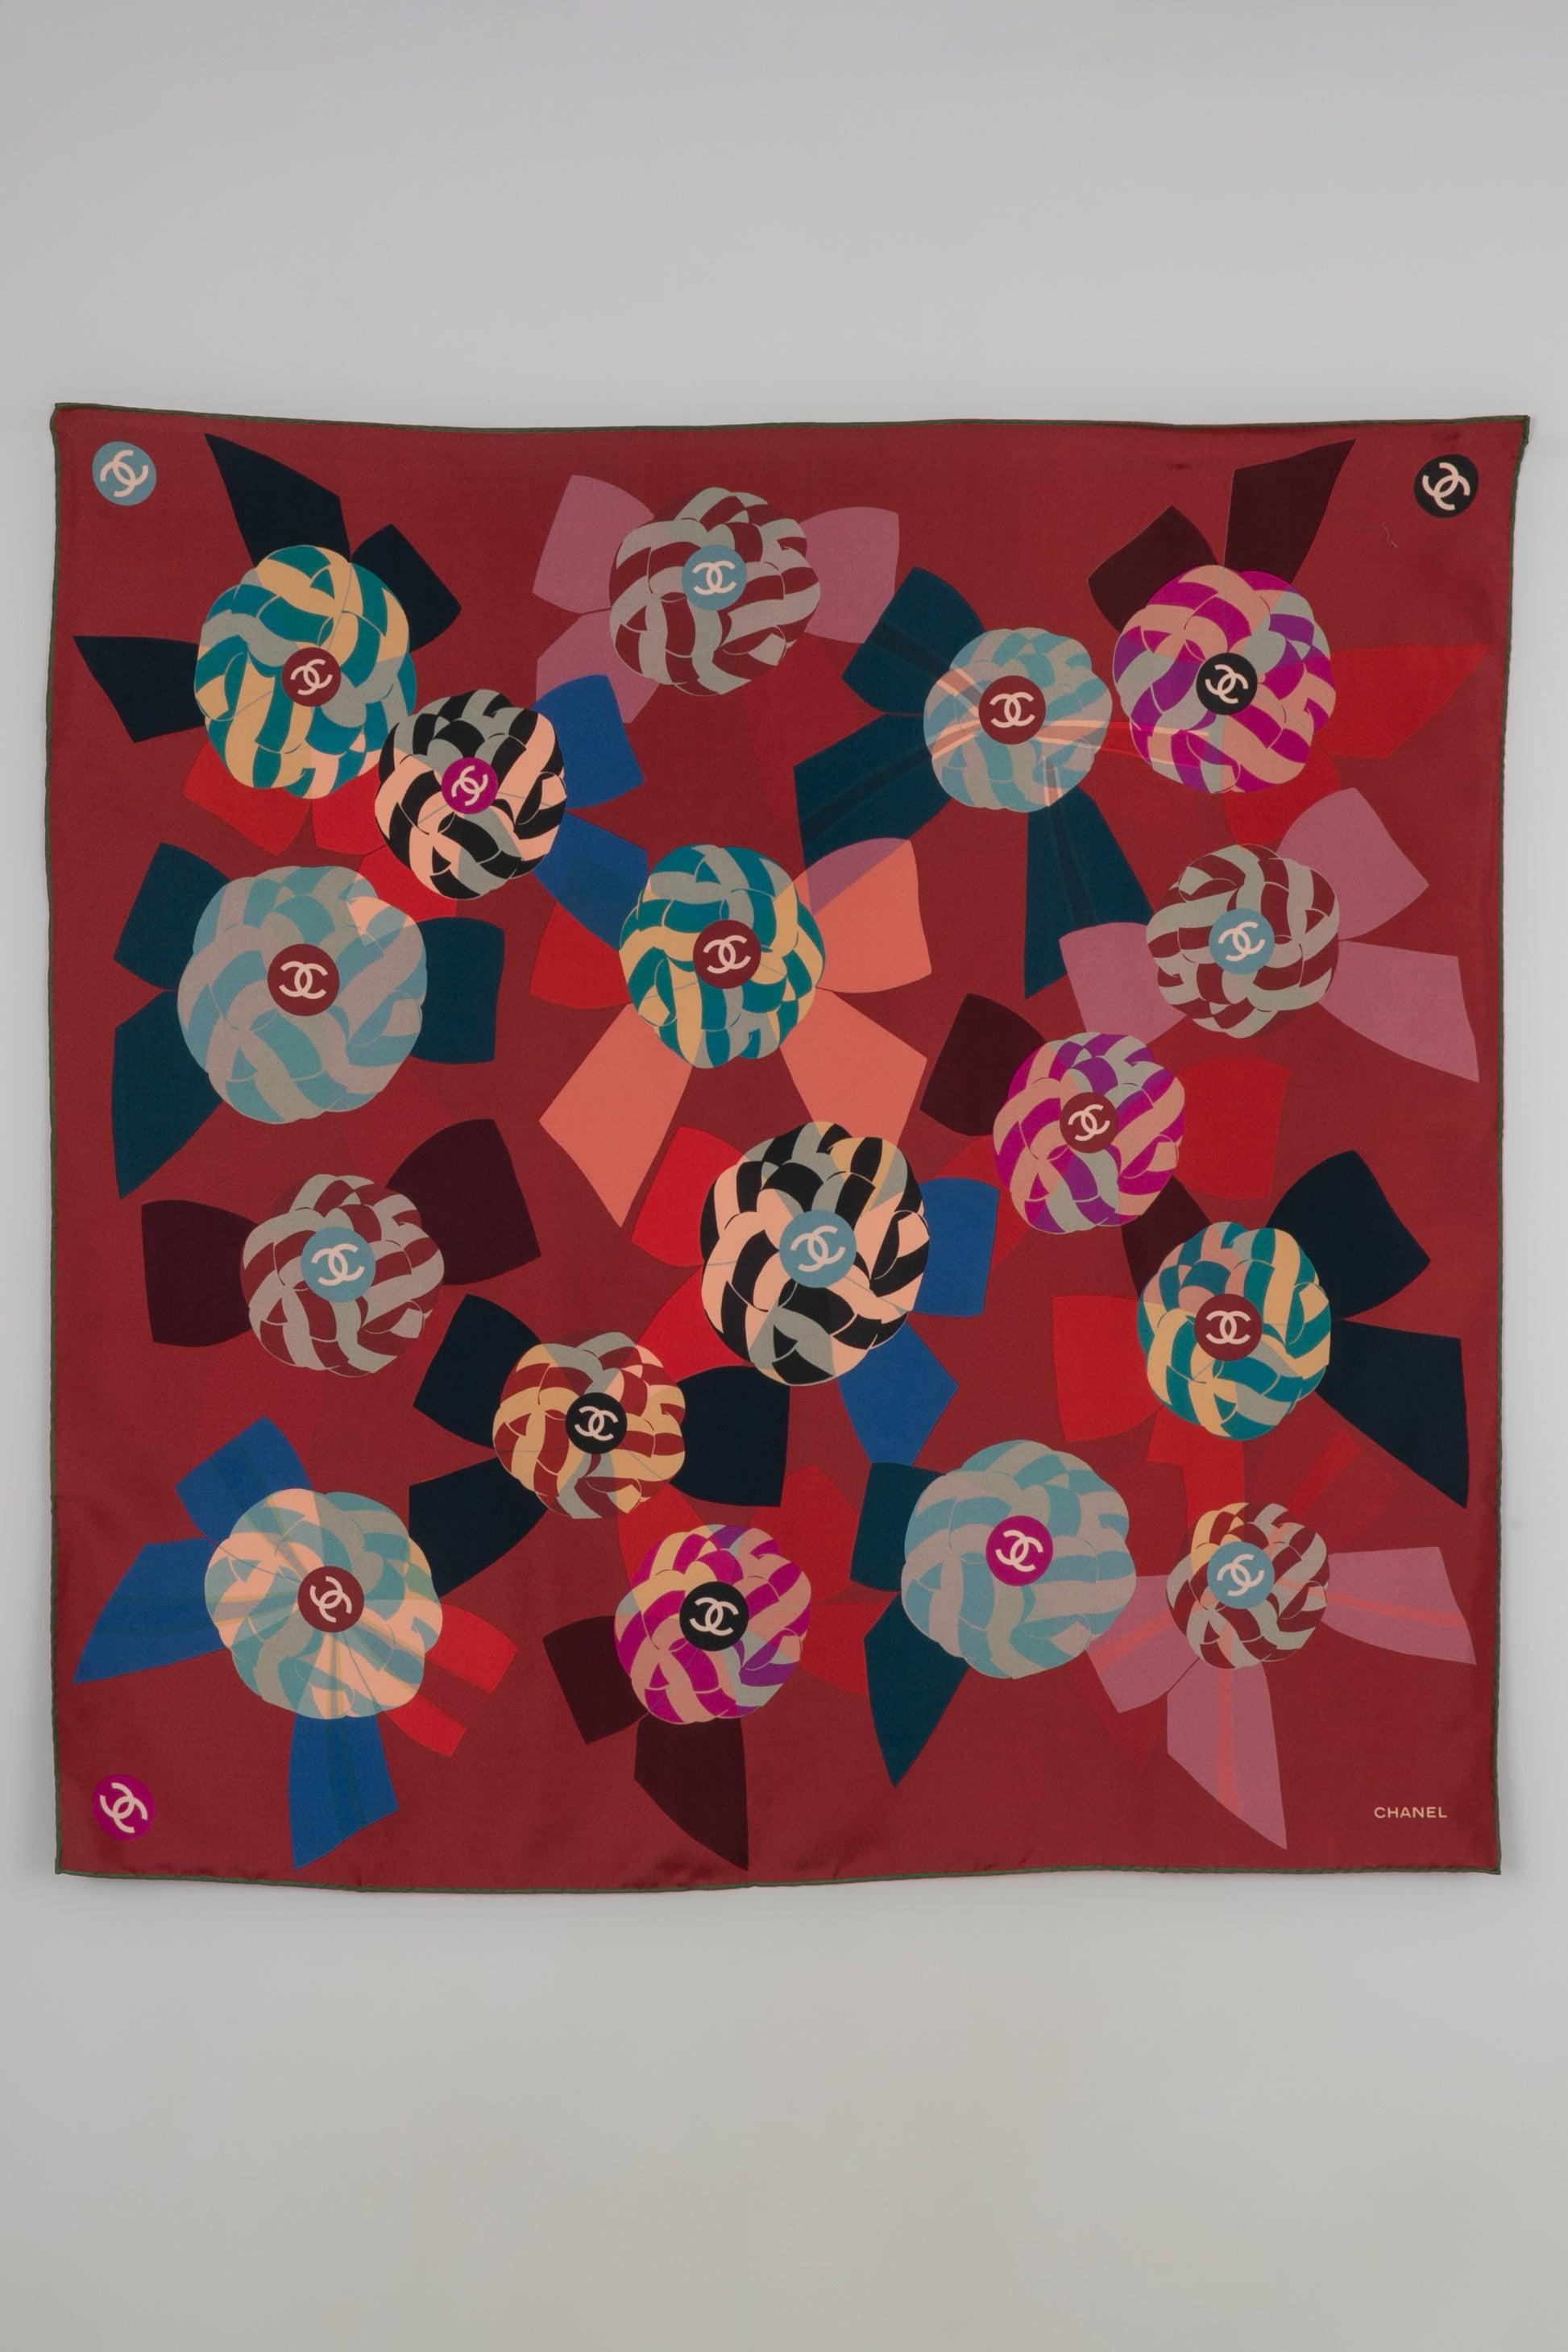 Chanel- Multicolored silk reversible foulard.

Additional information:
Condition: Very good condition
Dimensions: 90 cm x 90 cm

Seller Reference: FFC21
